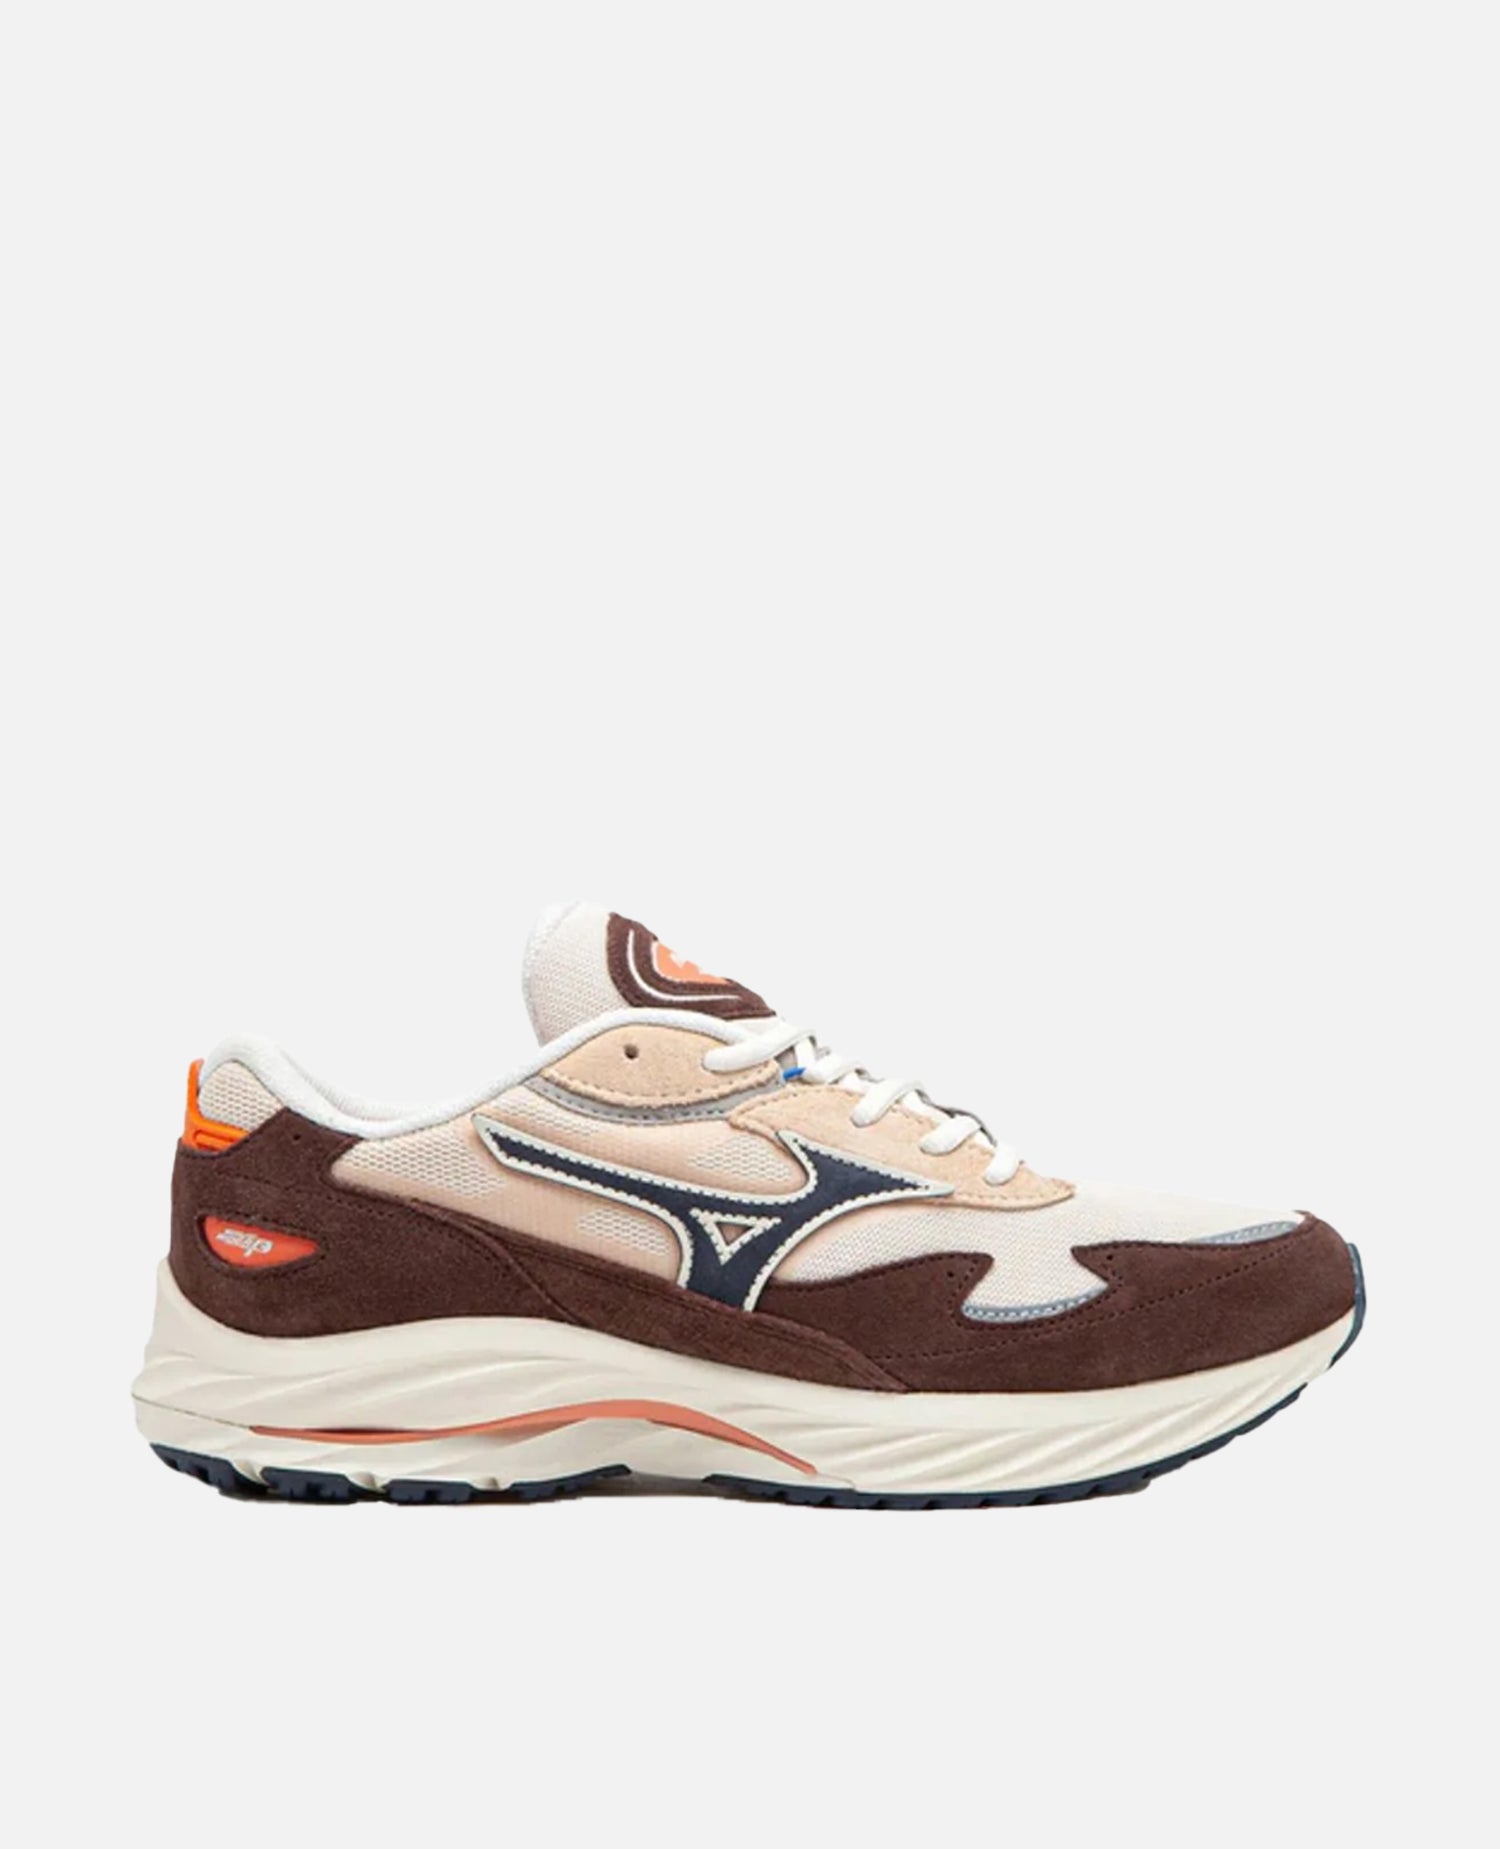 Mizuno Wave Rider Beta (Mother of Pearl/India Ink/Chloory Coffee)